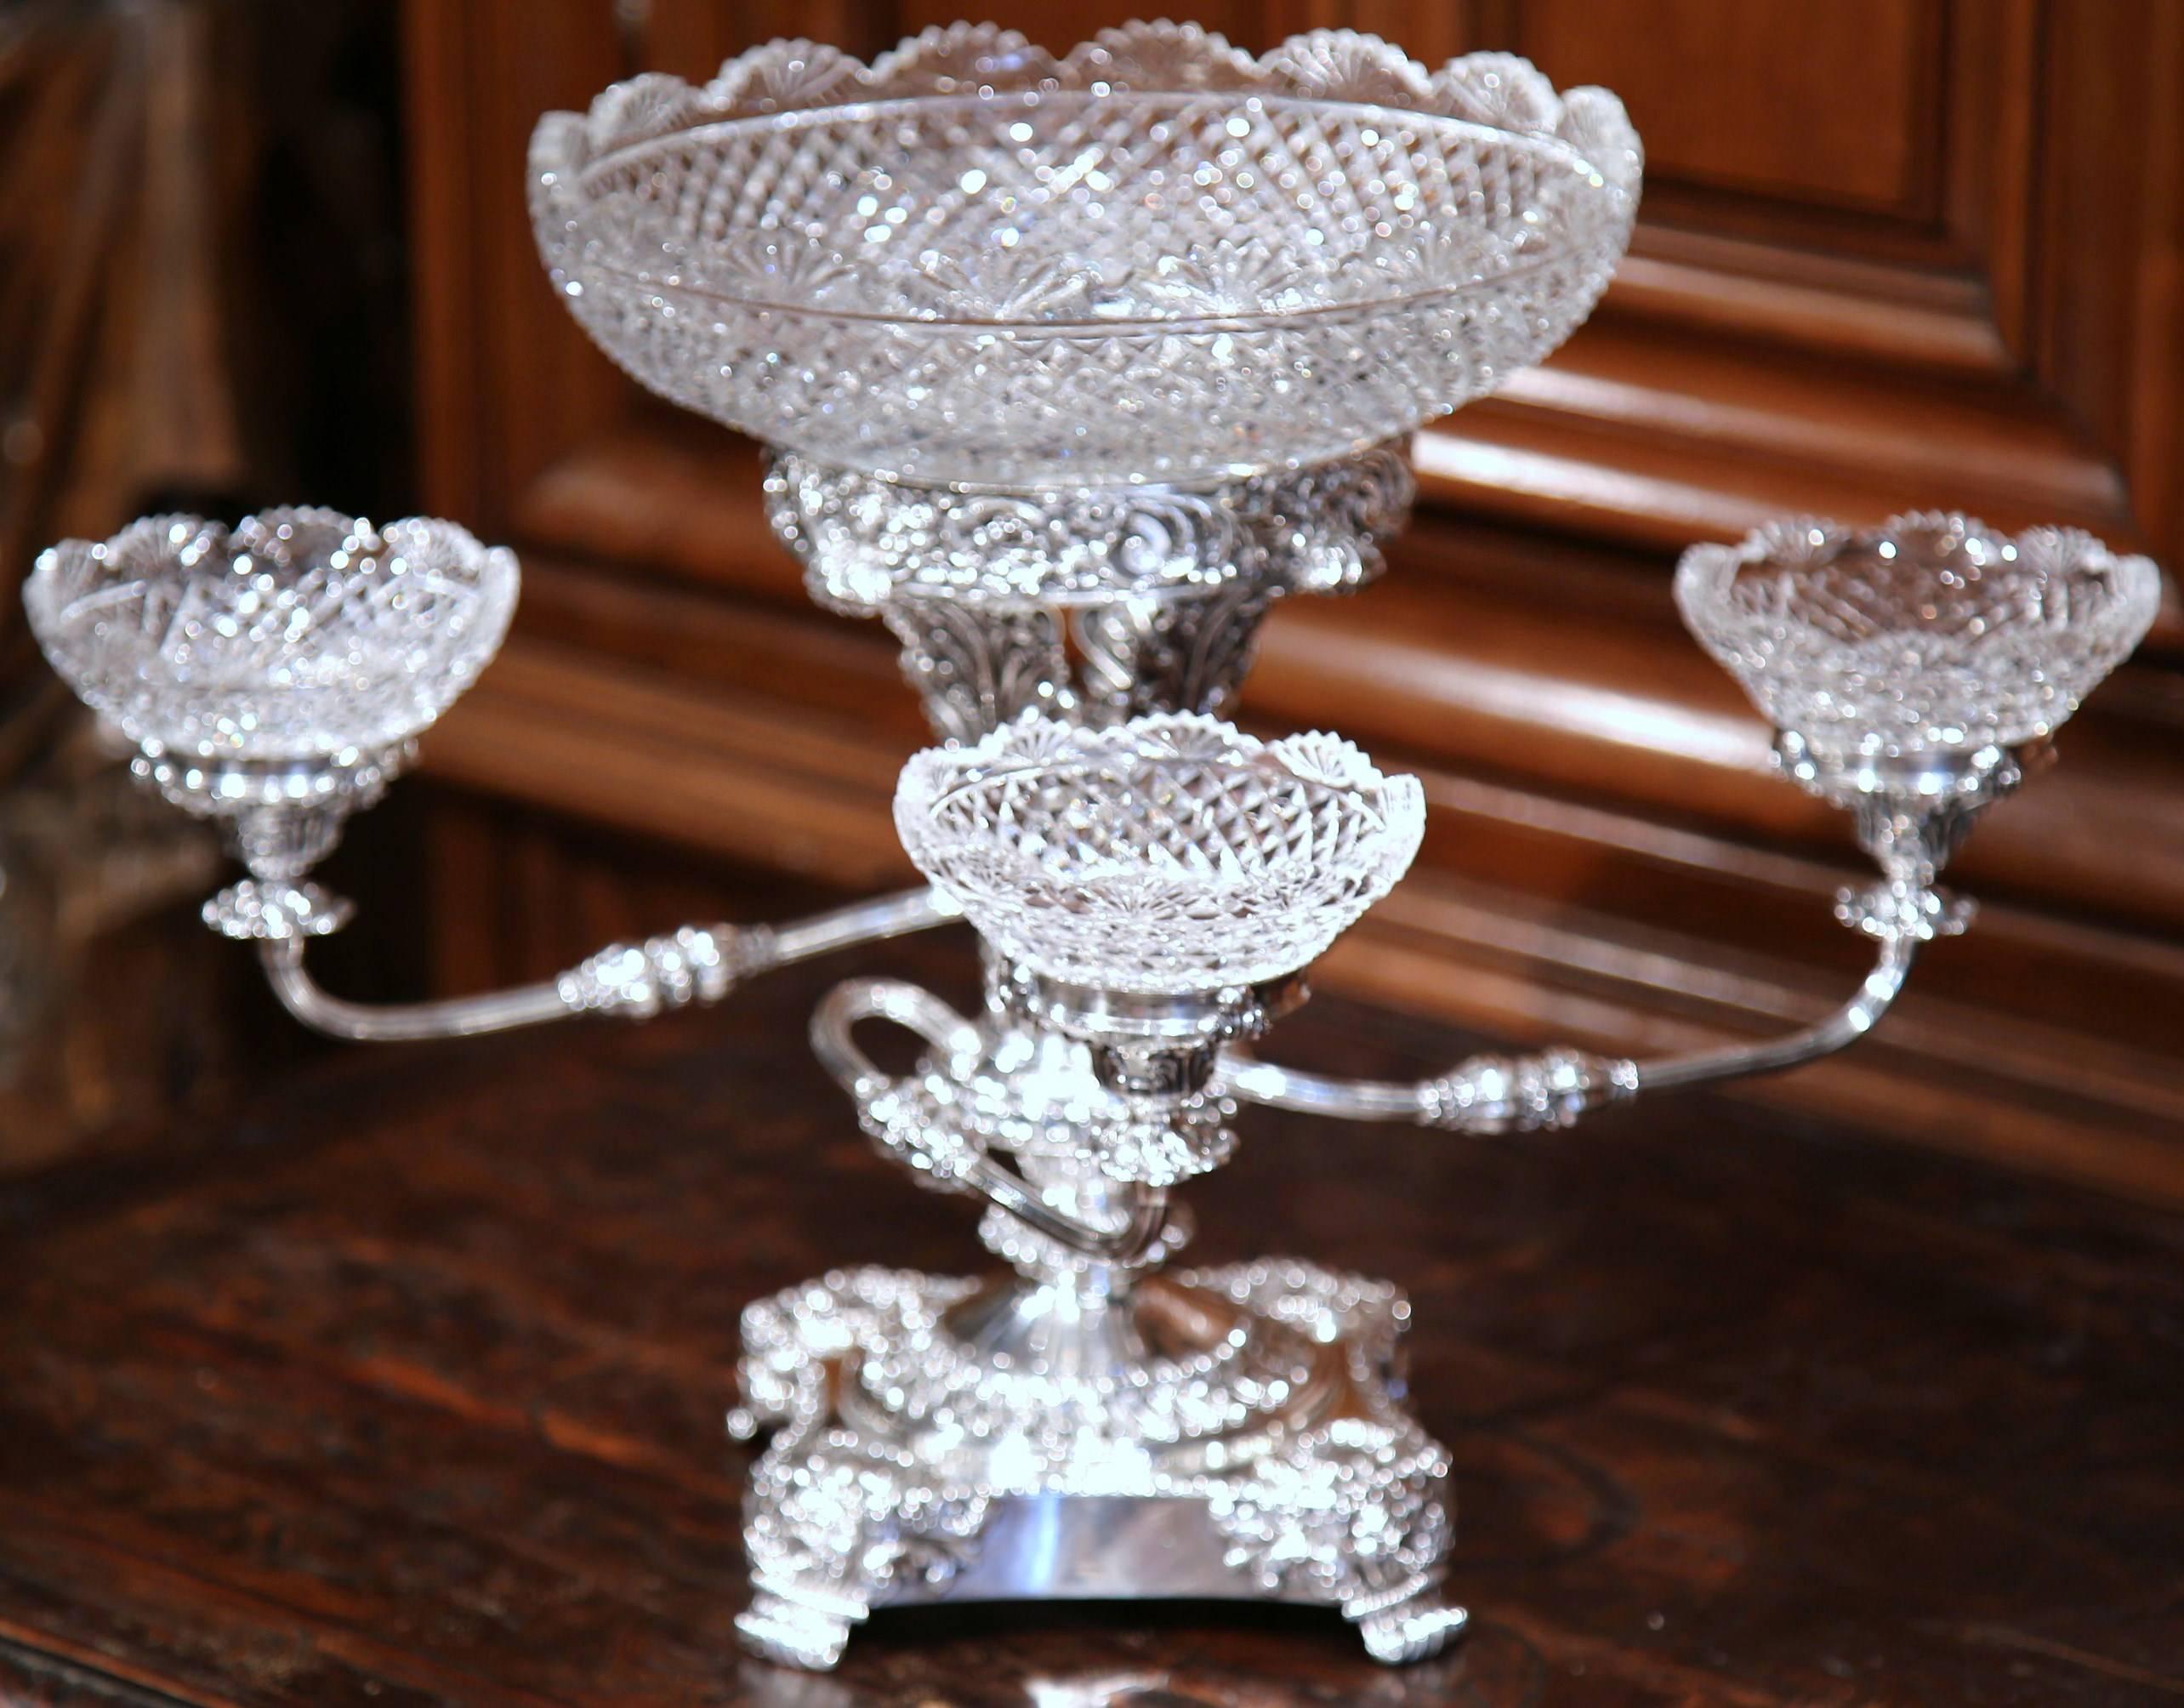 19th Century English Silver Plated Epergne Centrepiece with Five Cut-Glass Bowls 1